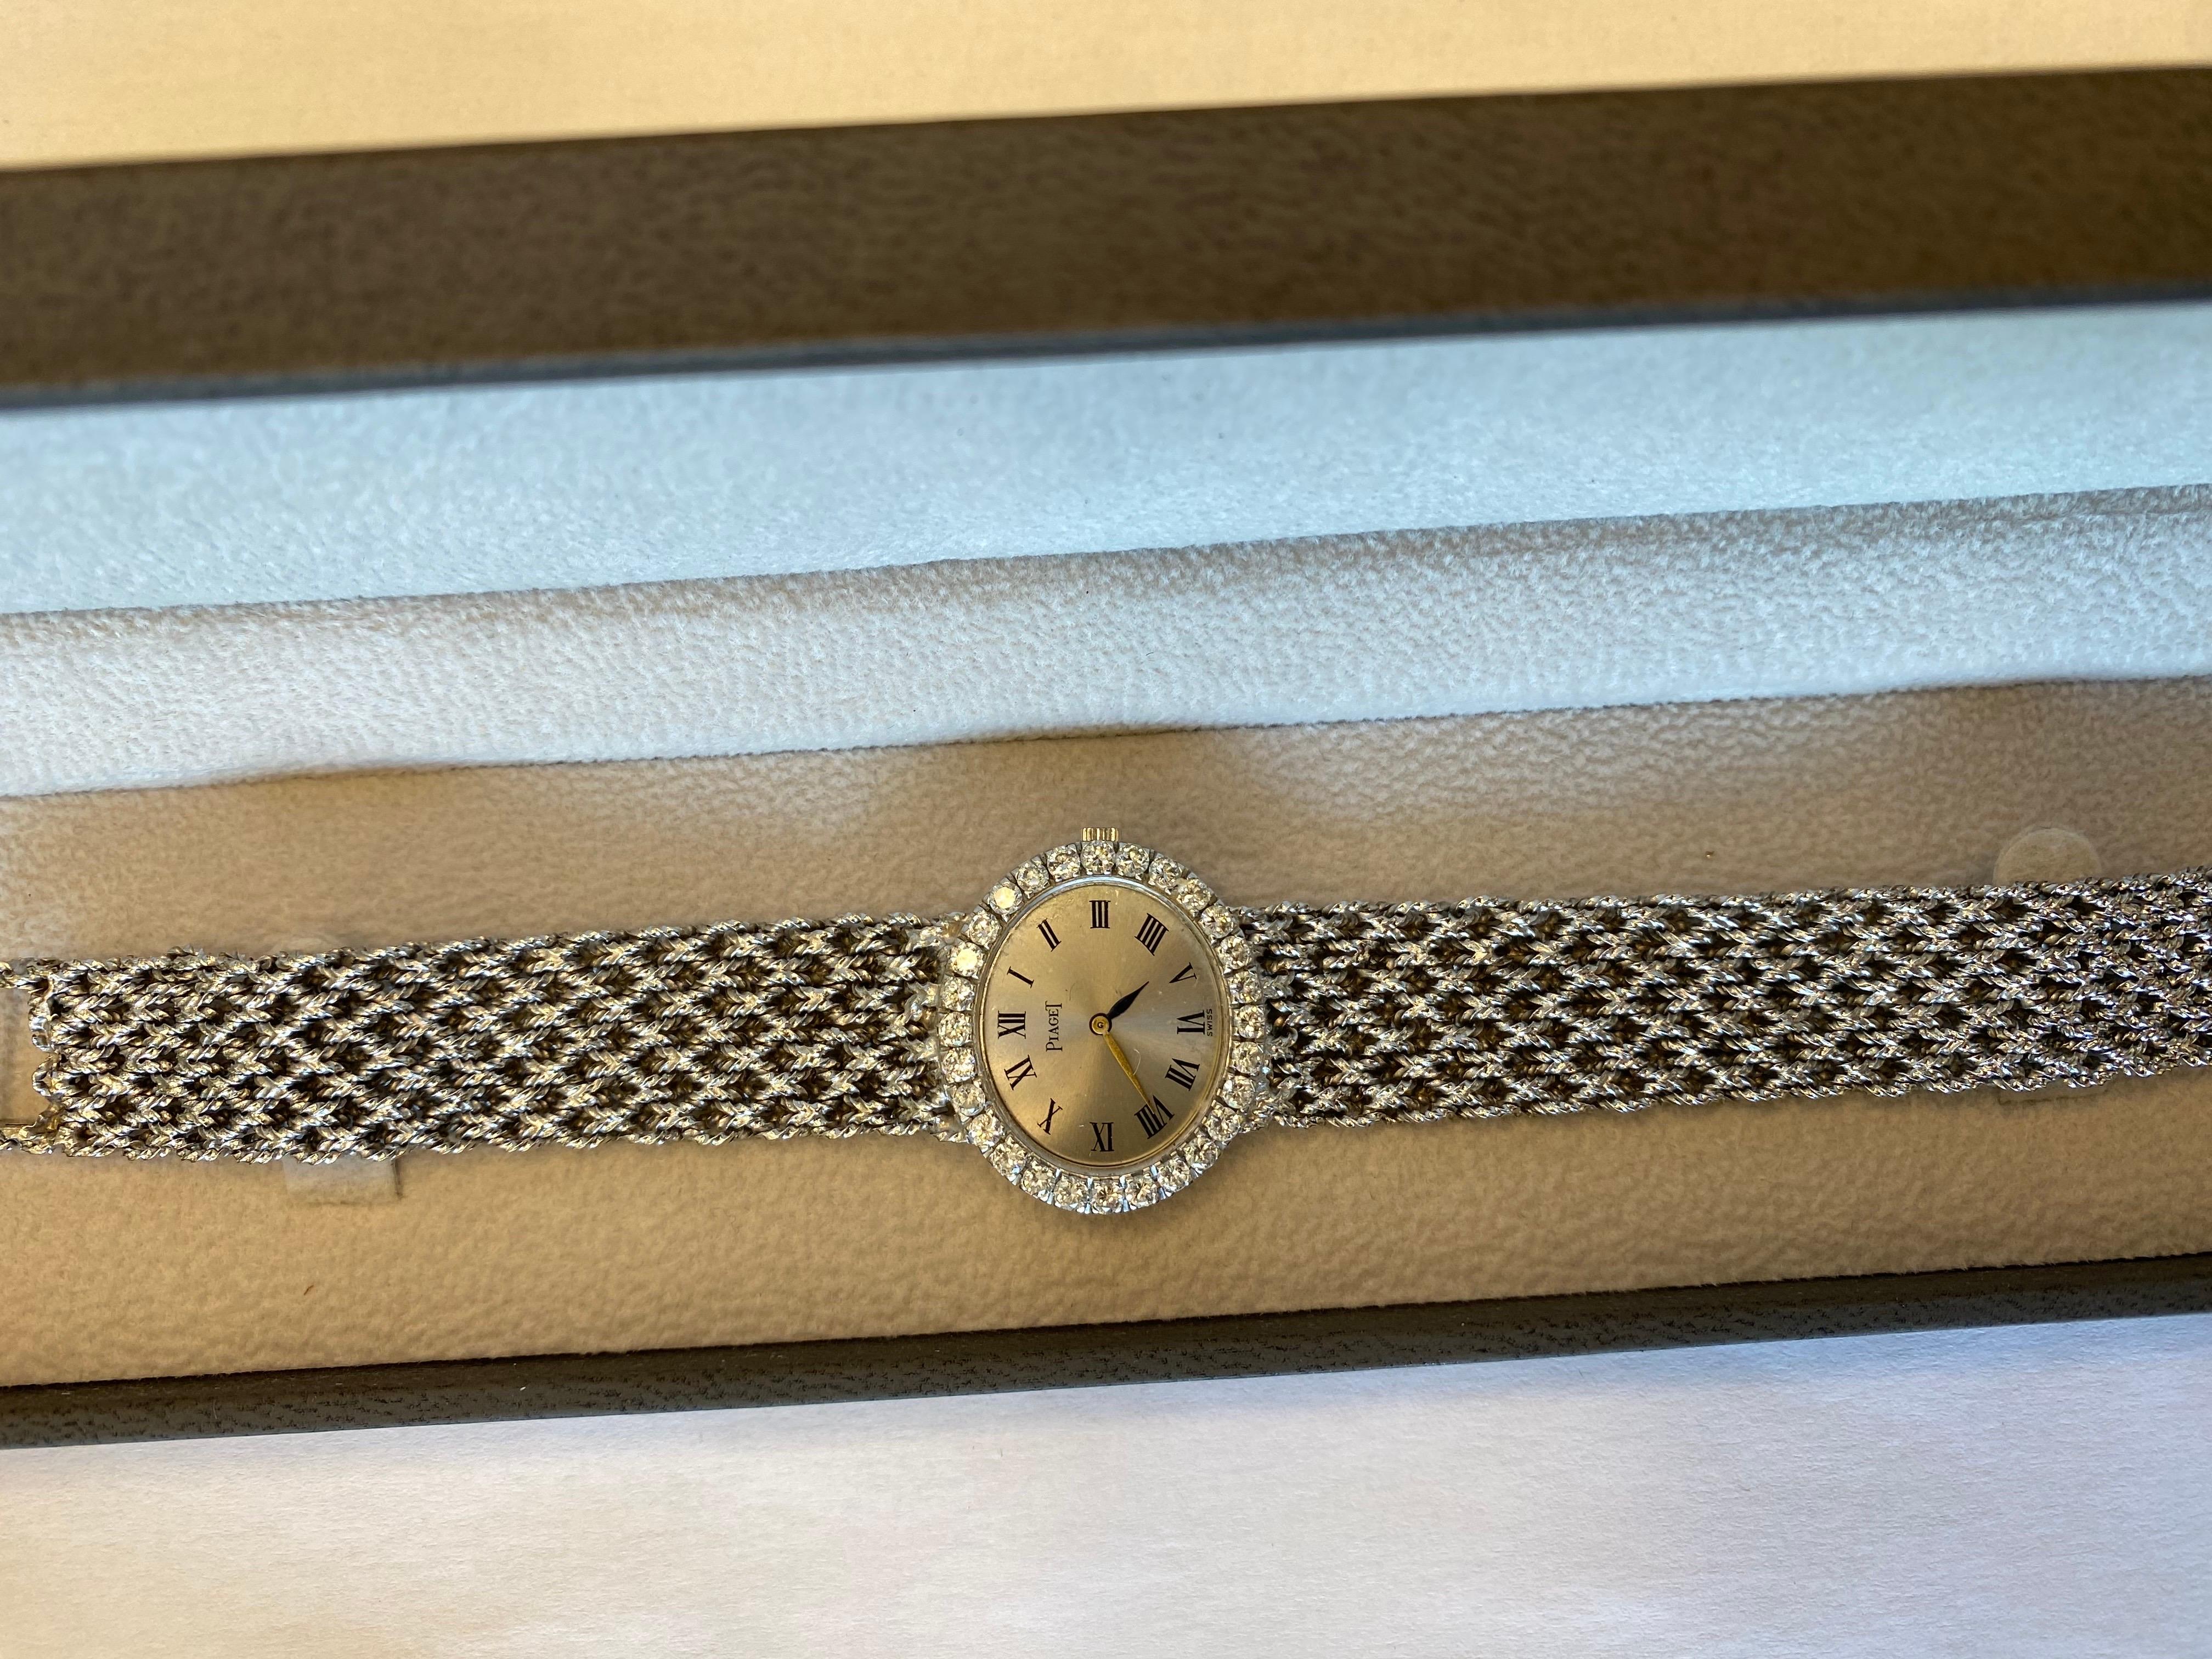 This 18k Original Piaget Watch has some unique look!
With a stunning display and diamonds on the bezel 
This watch stands out the best!

diameter: 2.2x3.5 (elliptic)